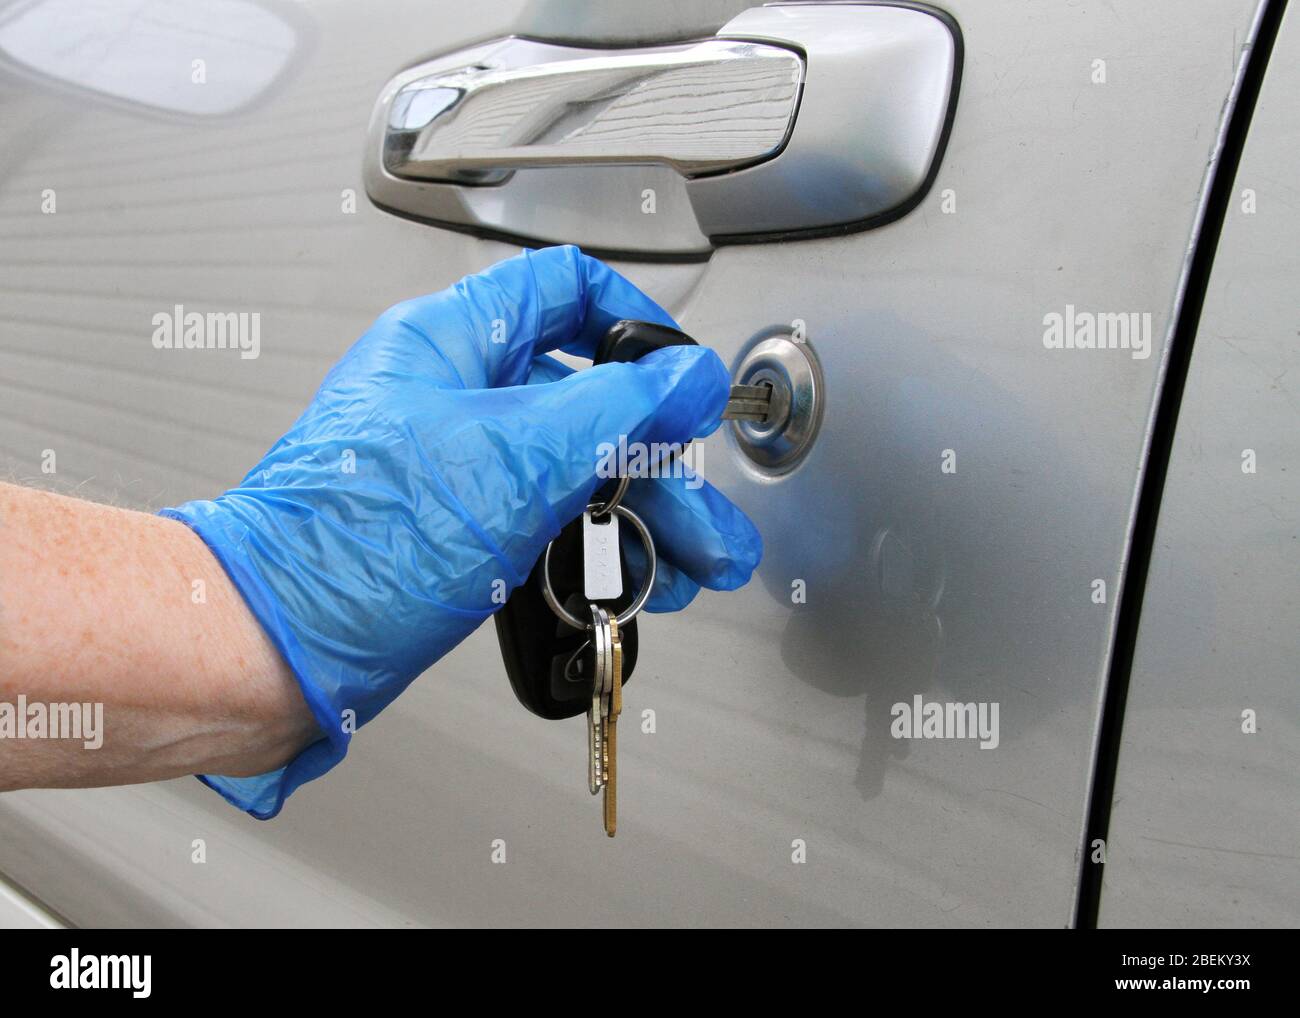 A close up view of a hand in a blue latex glove unlocking a silver car door with keys during the coronavirus pandemic. Stock Photo